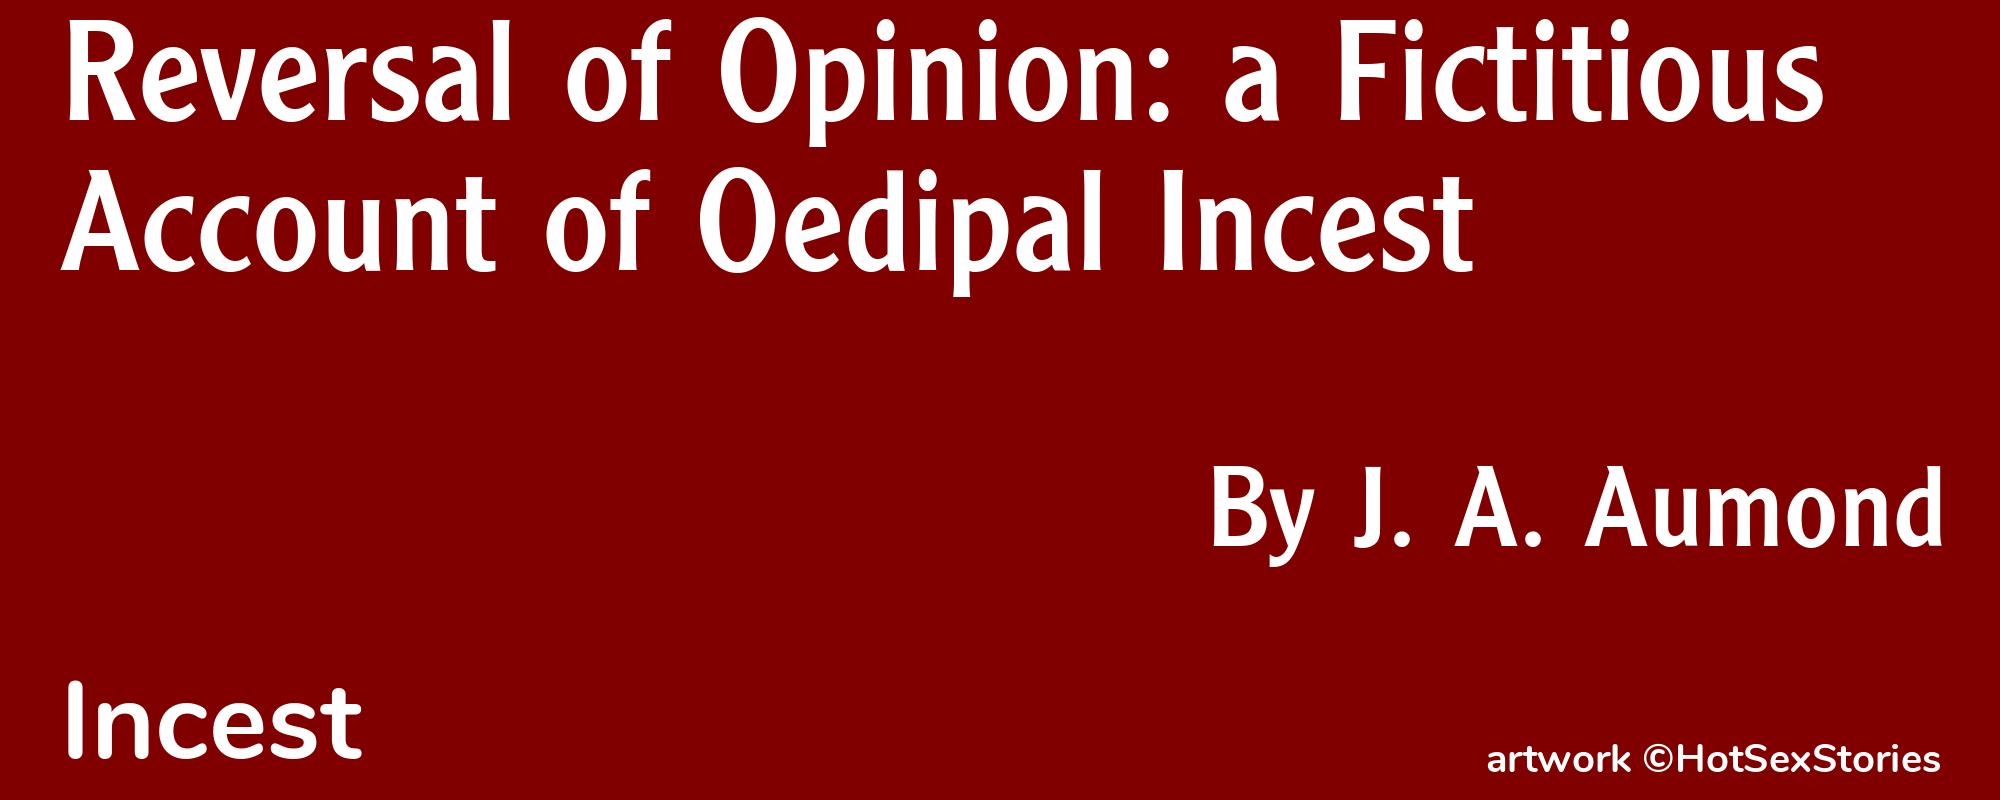 Reversal of Opinion: a Fictitious Account of Oedipal Incest - Cover